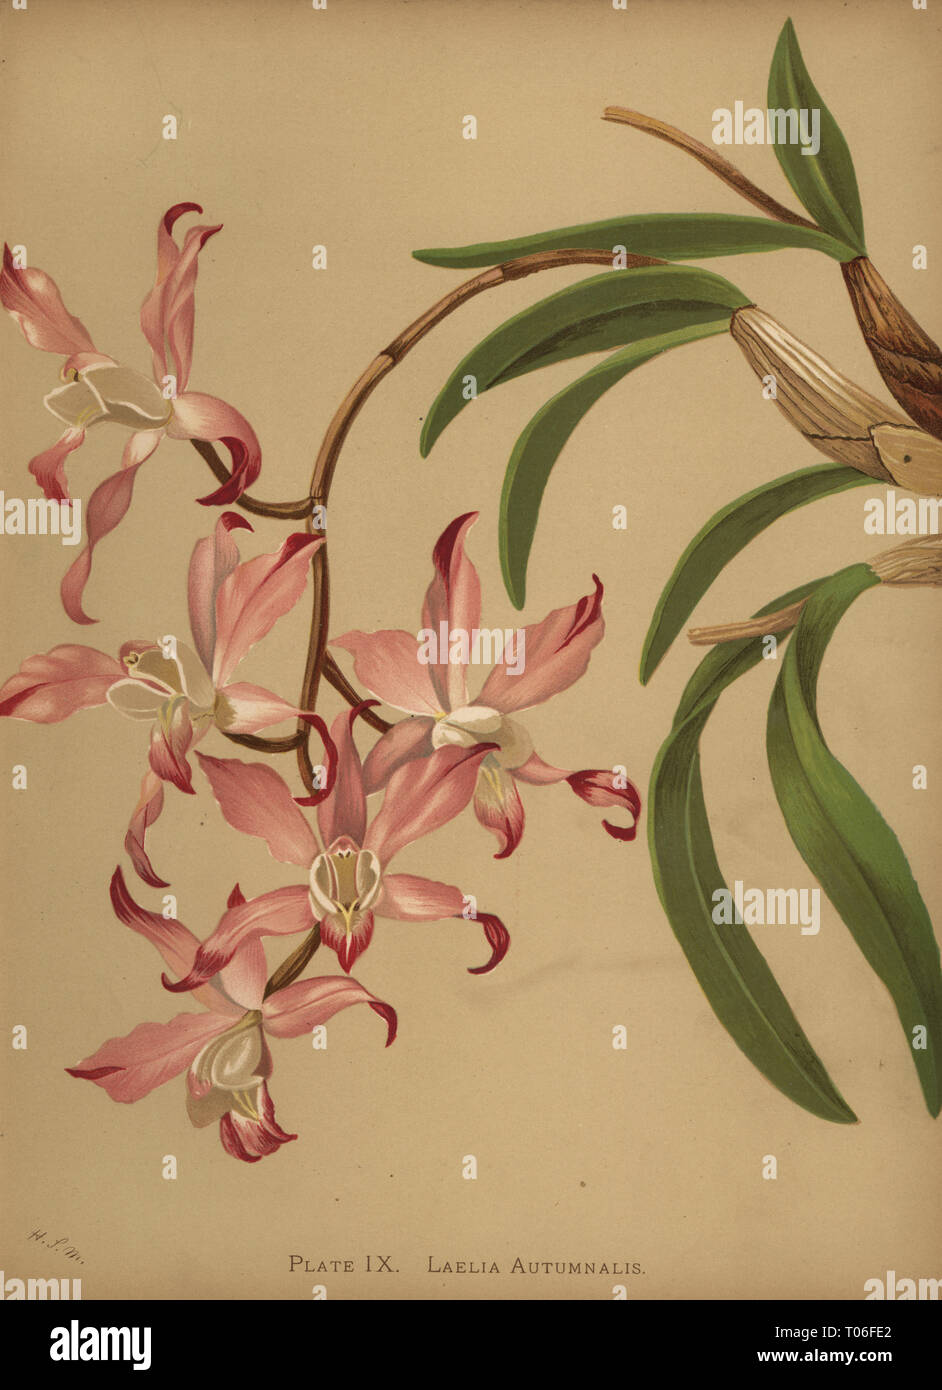 Autumn laelia orchid, Laelia autumnalis. Chromolithograph by Hatch Company after a botanical illustration by Harriet Stewart Miner from Orchids, the Royal Family of Plants, Lee & Shepard, Boston, 1885. The first American color plate book on orchids by woman botanist Miner. Stock Photo